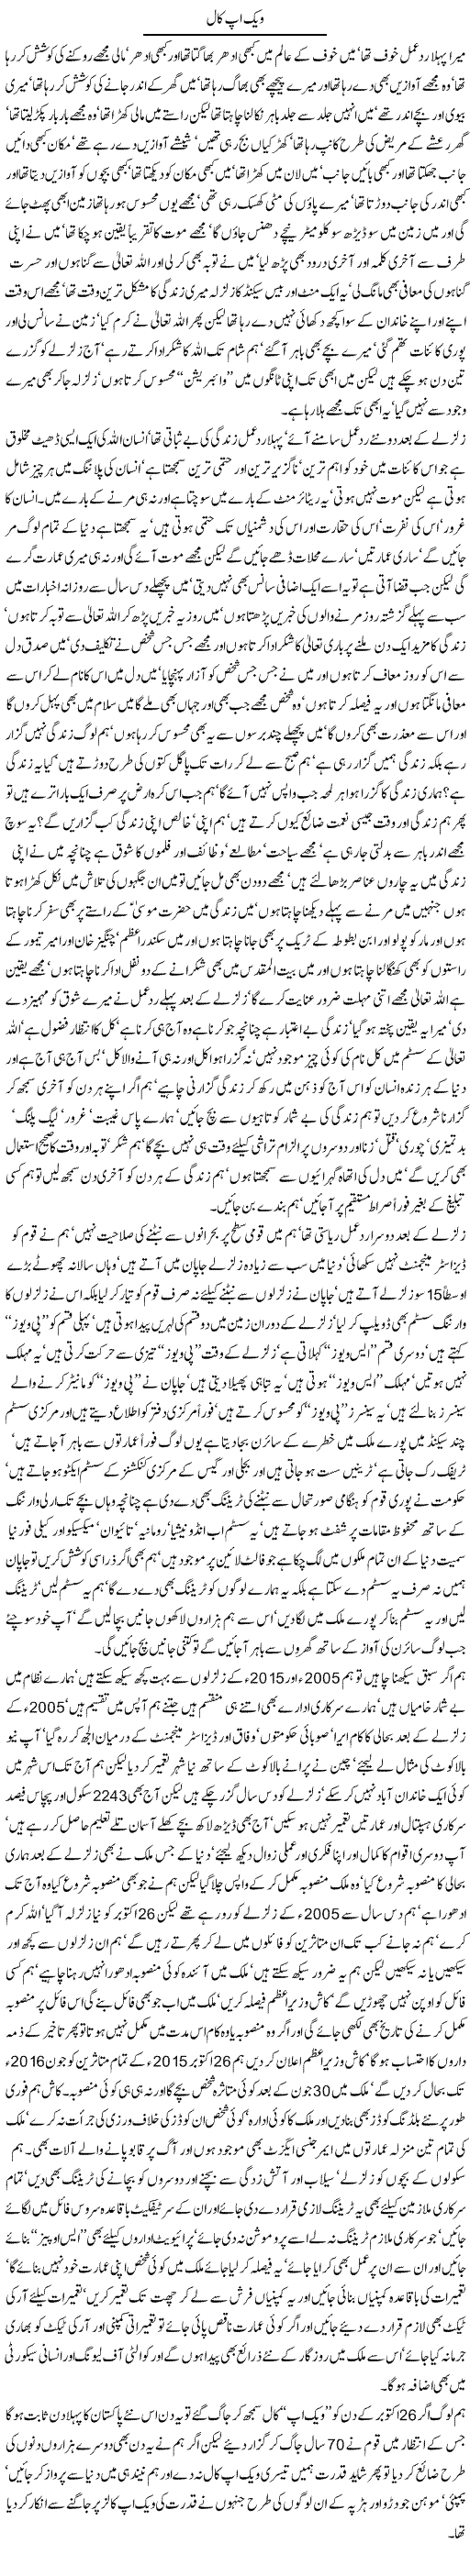 Wakeup call By Javed Chaudhry